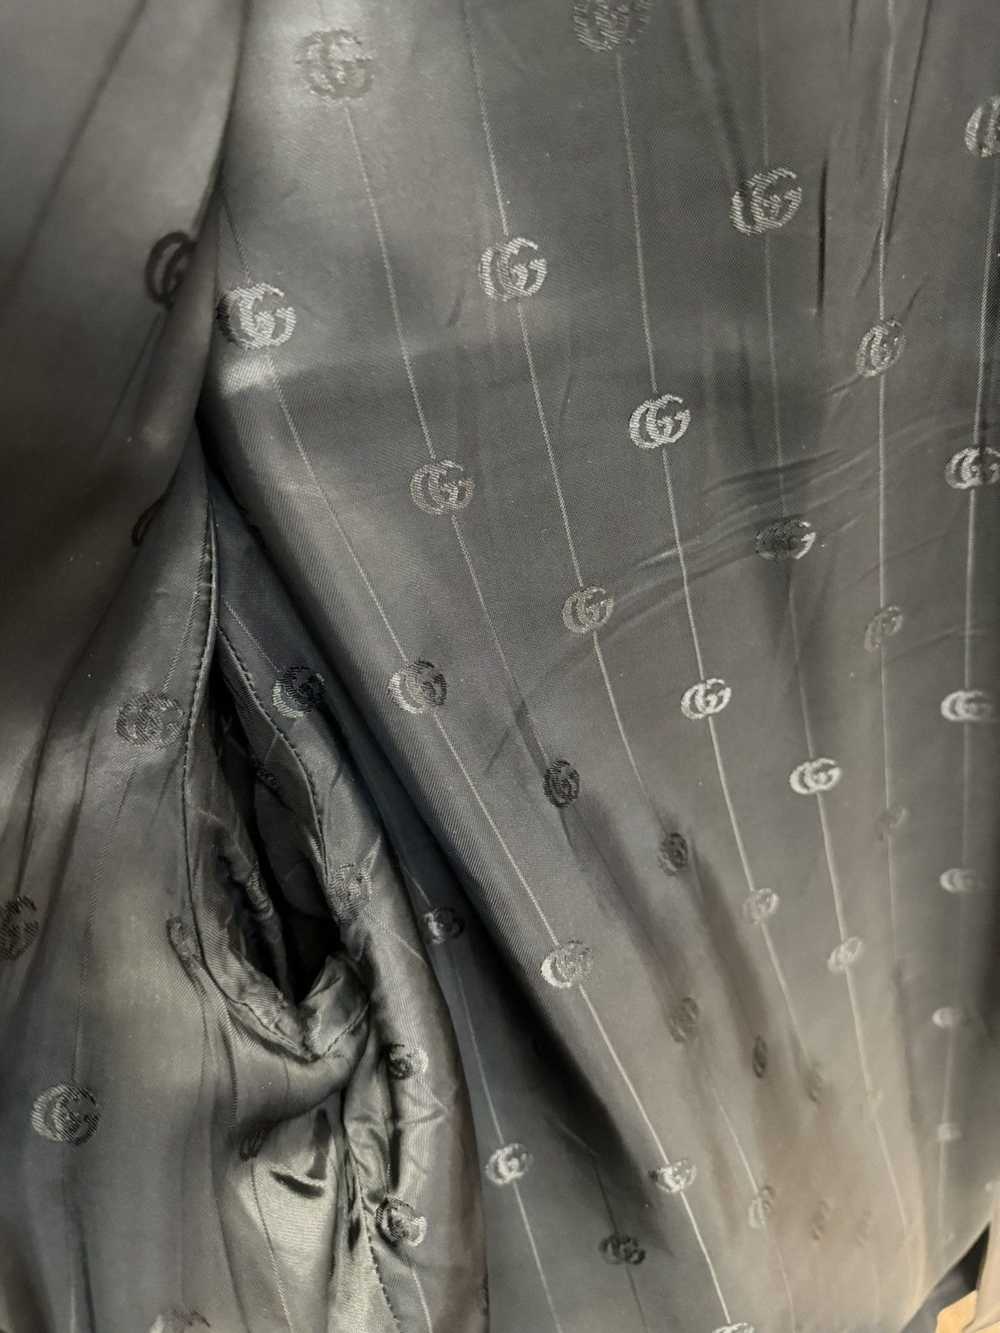 Gucci Gucci Leather Logo Jacket $3500 retail - image 3